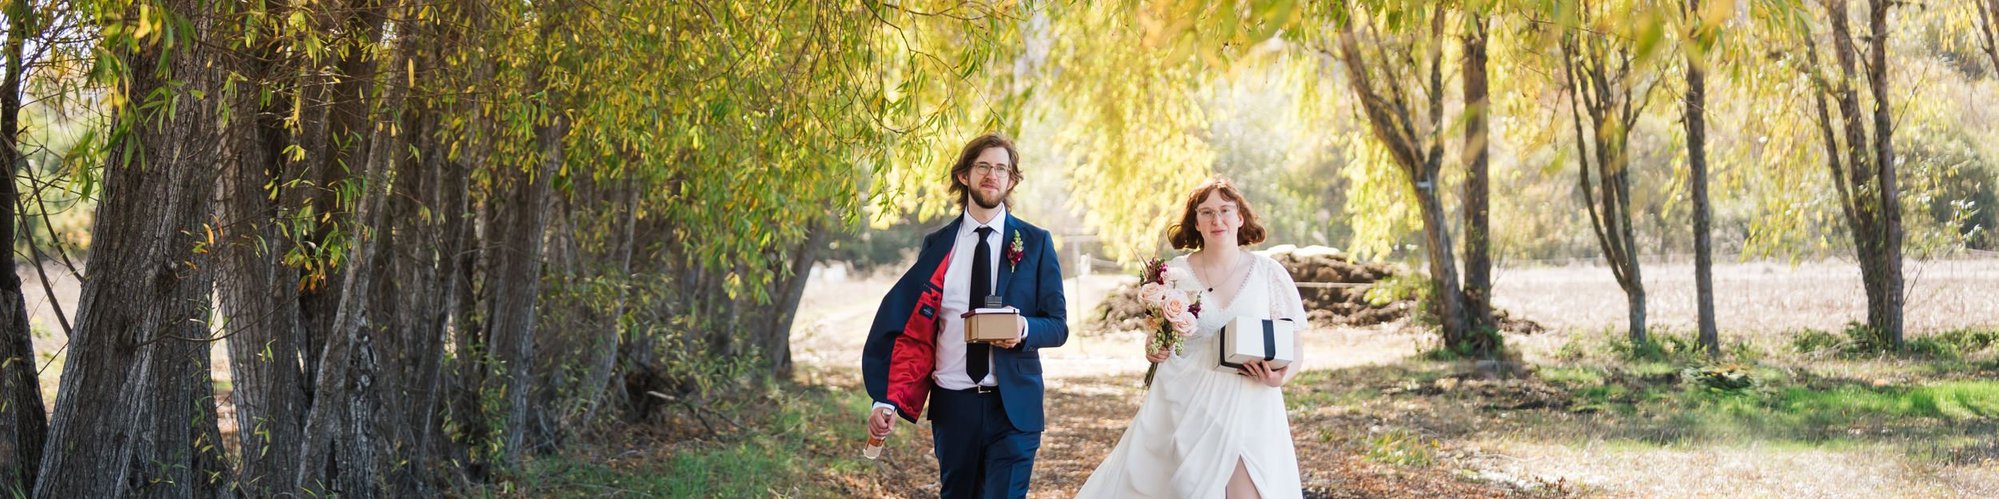 An eloping bride and groom walk down a windy lane under autumn trees, carrying a cake box